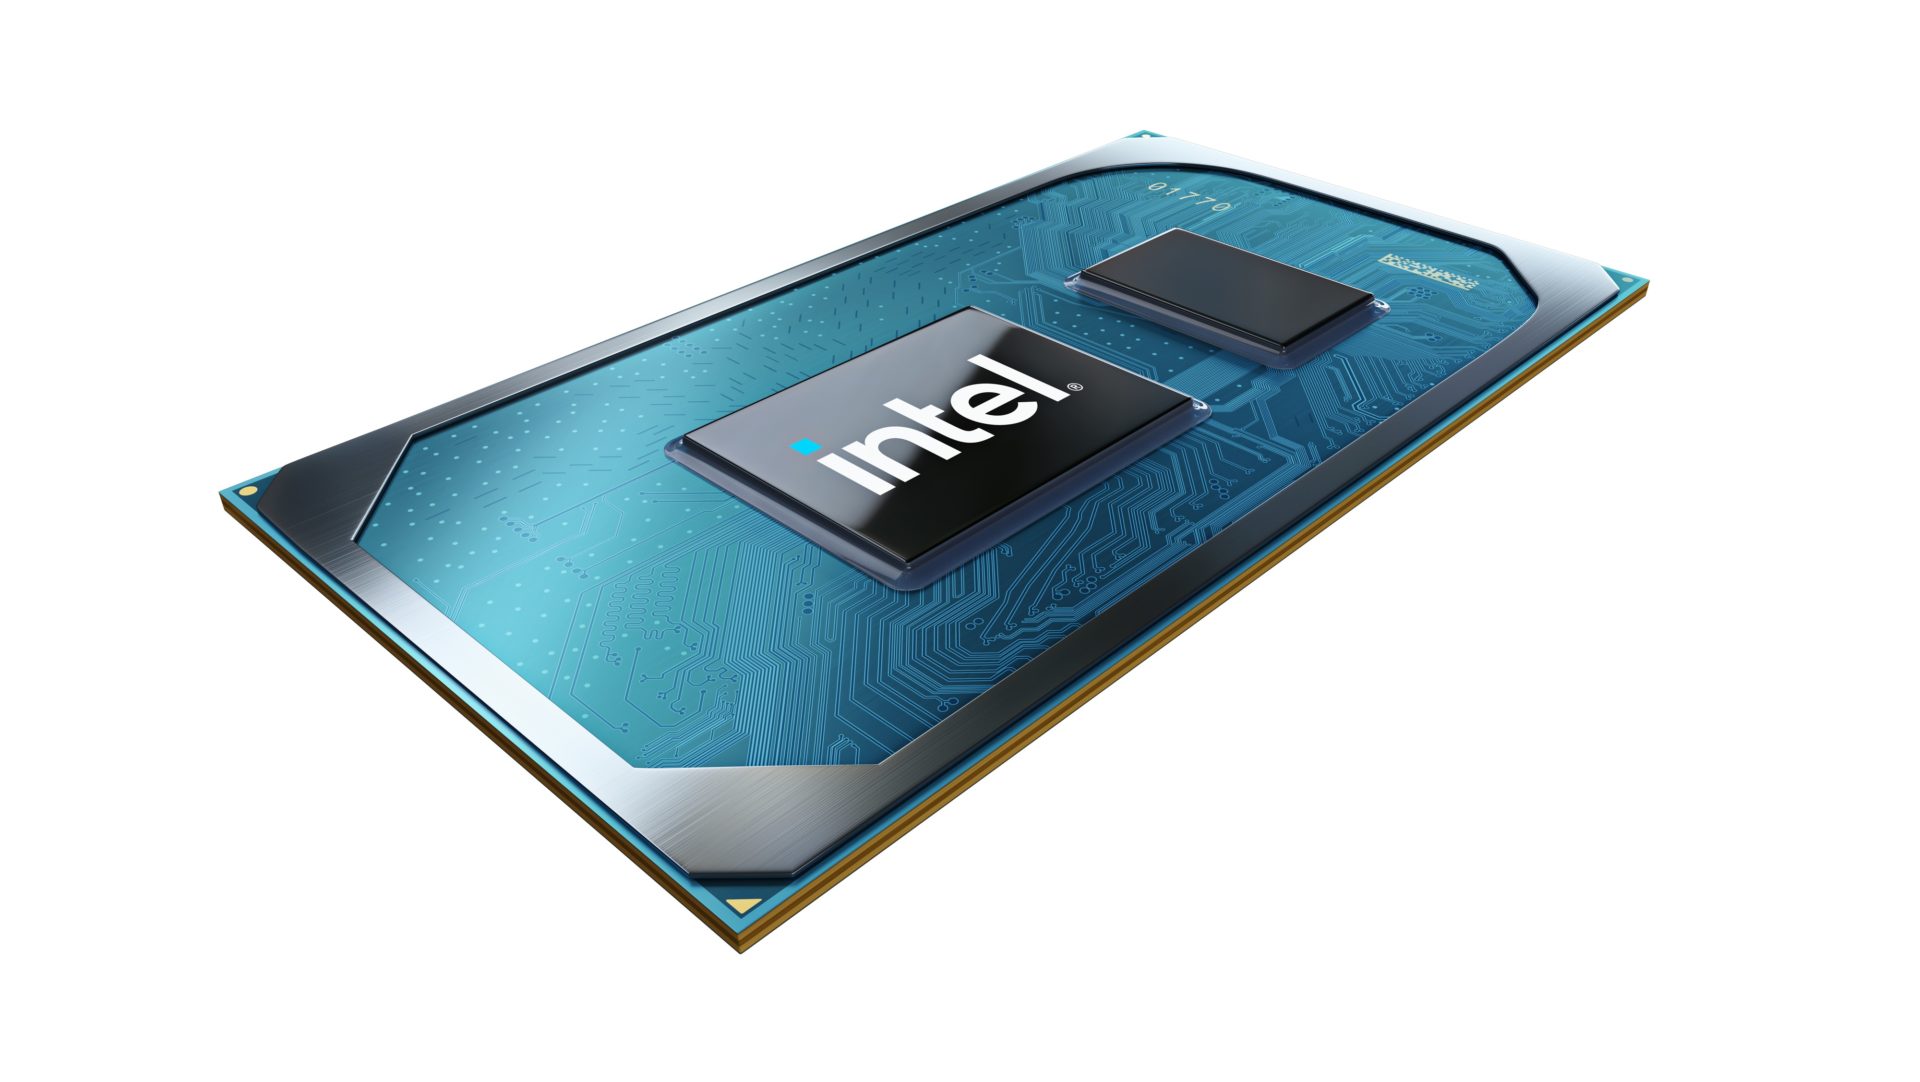 Intel Launches World’s Best Processor for ThinandLight Laptops 11th